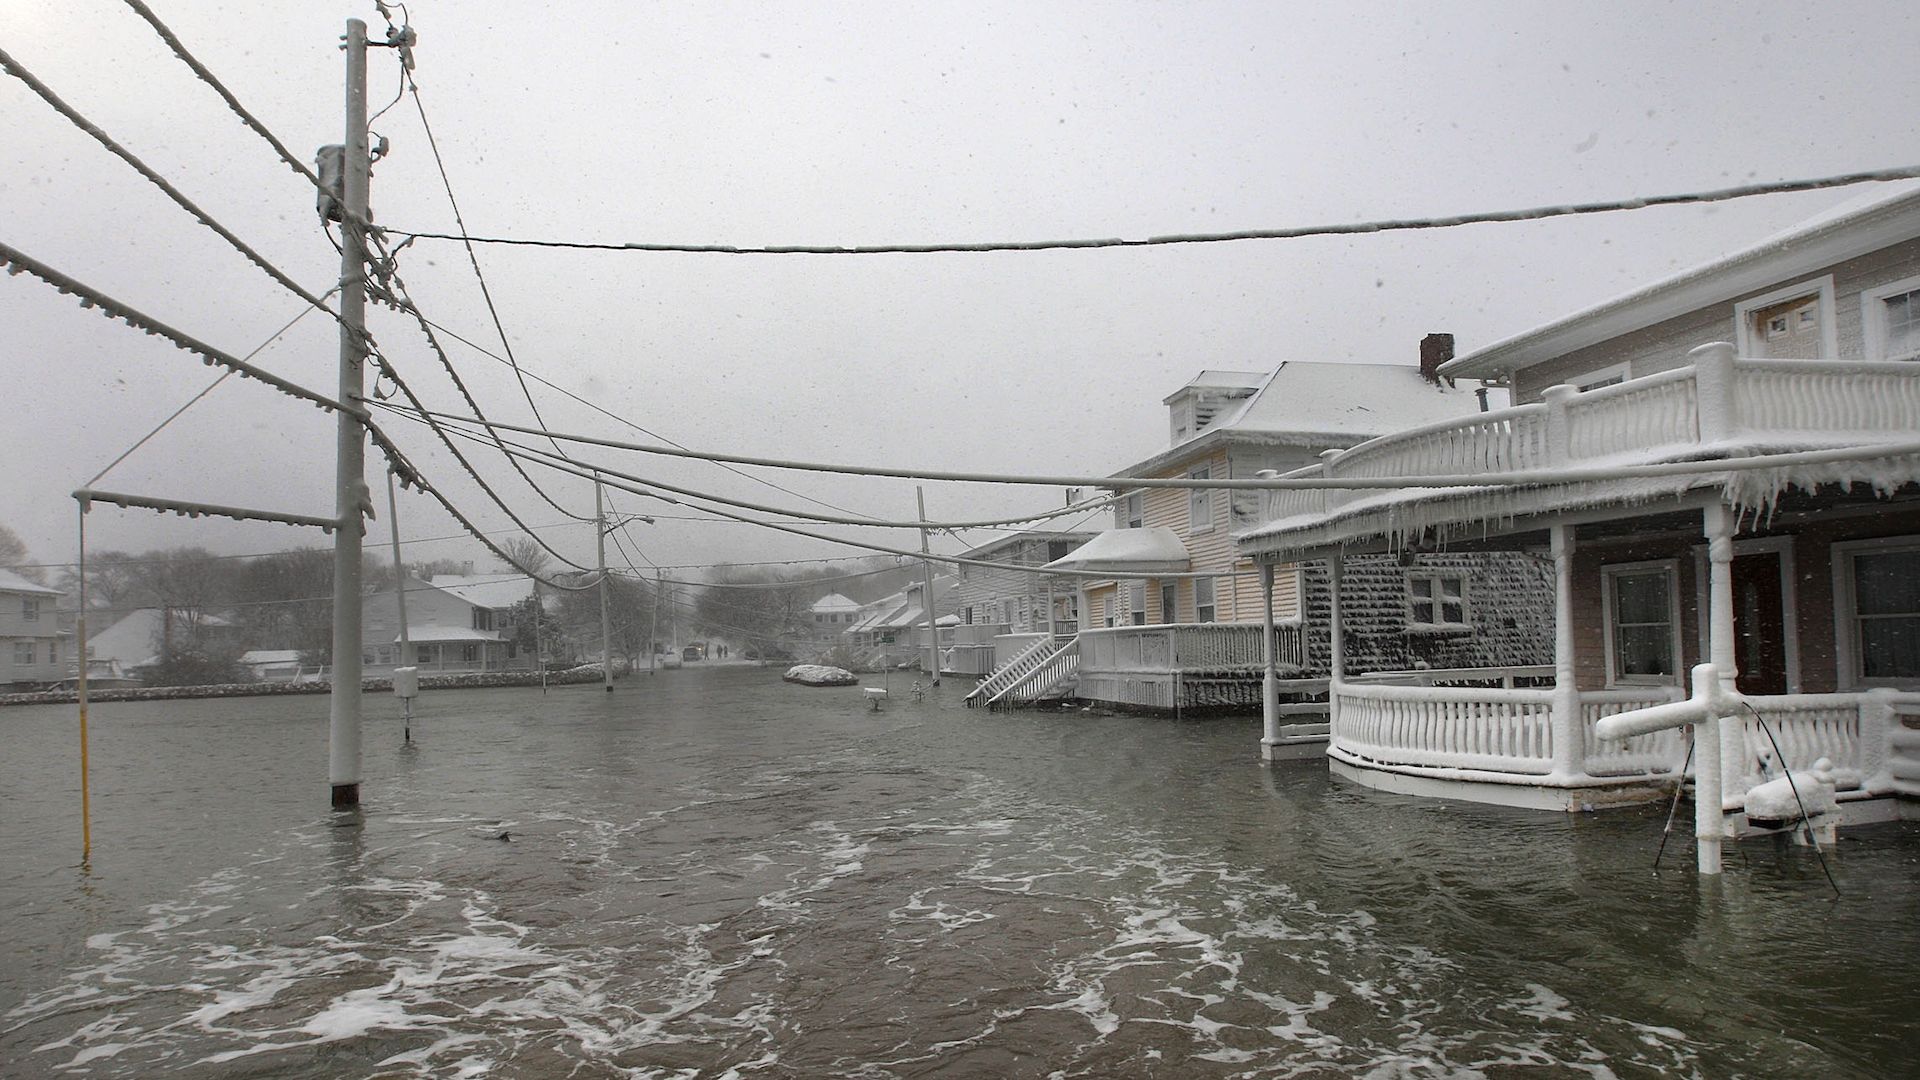 A flooded street after a storm at Turner Road in Scituate, Mass.